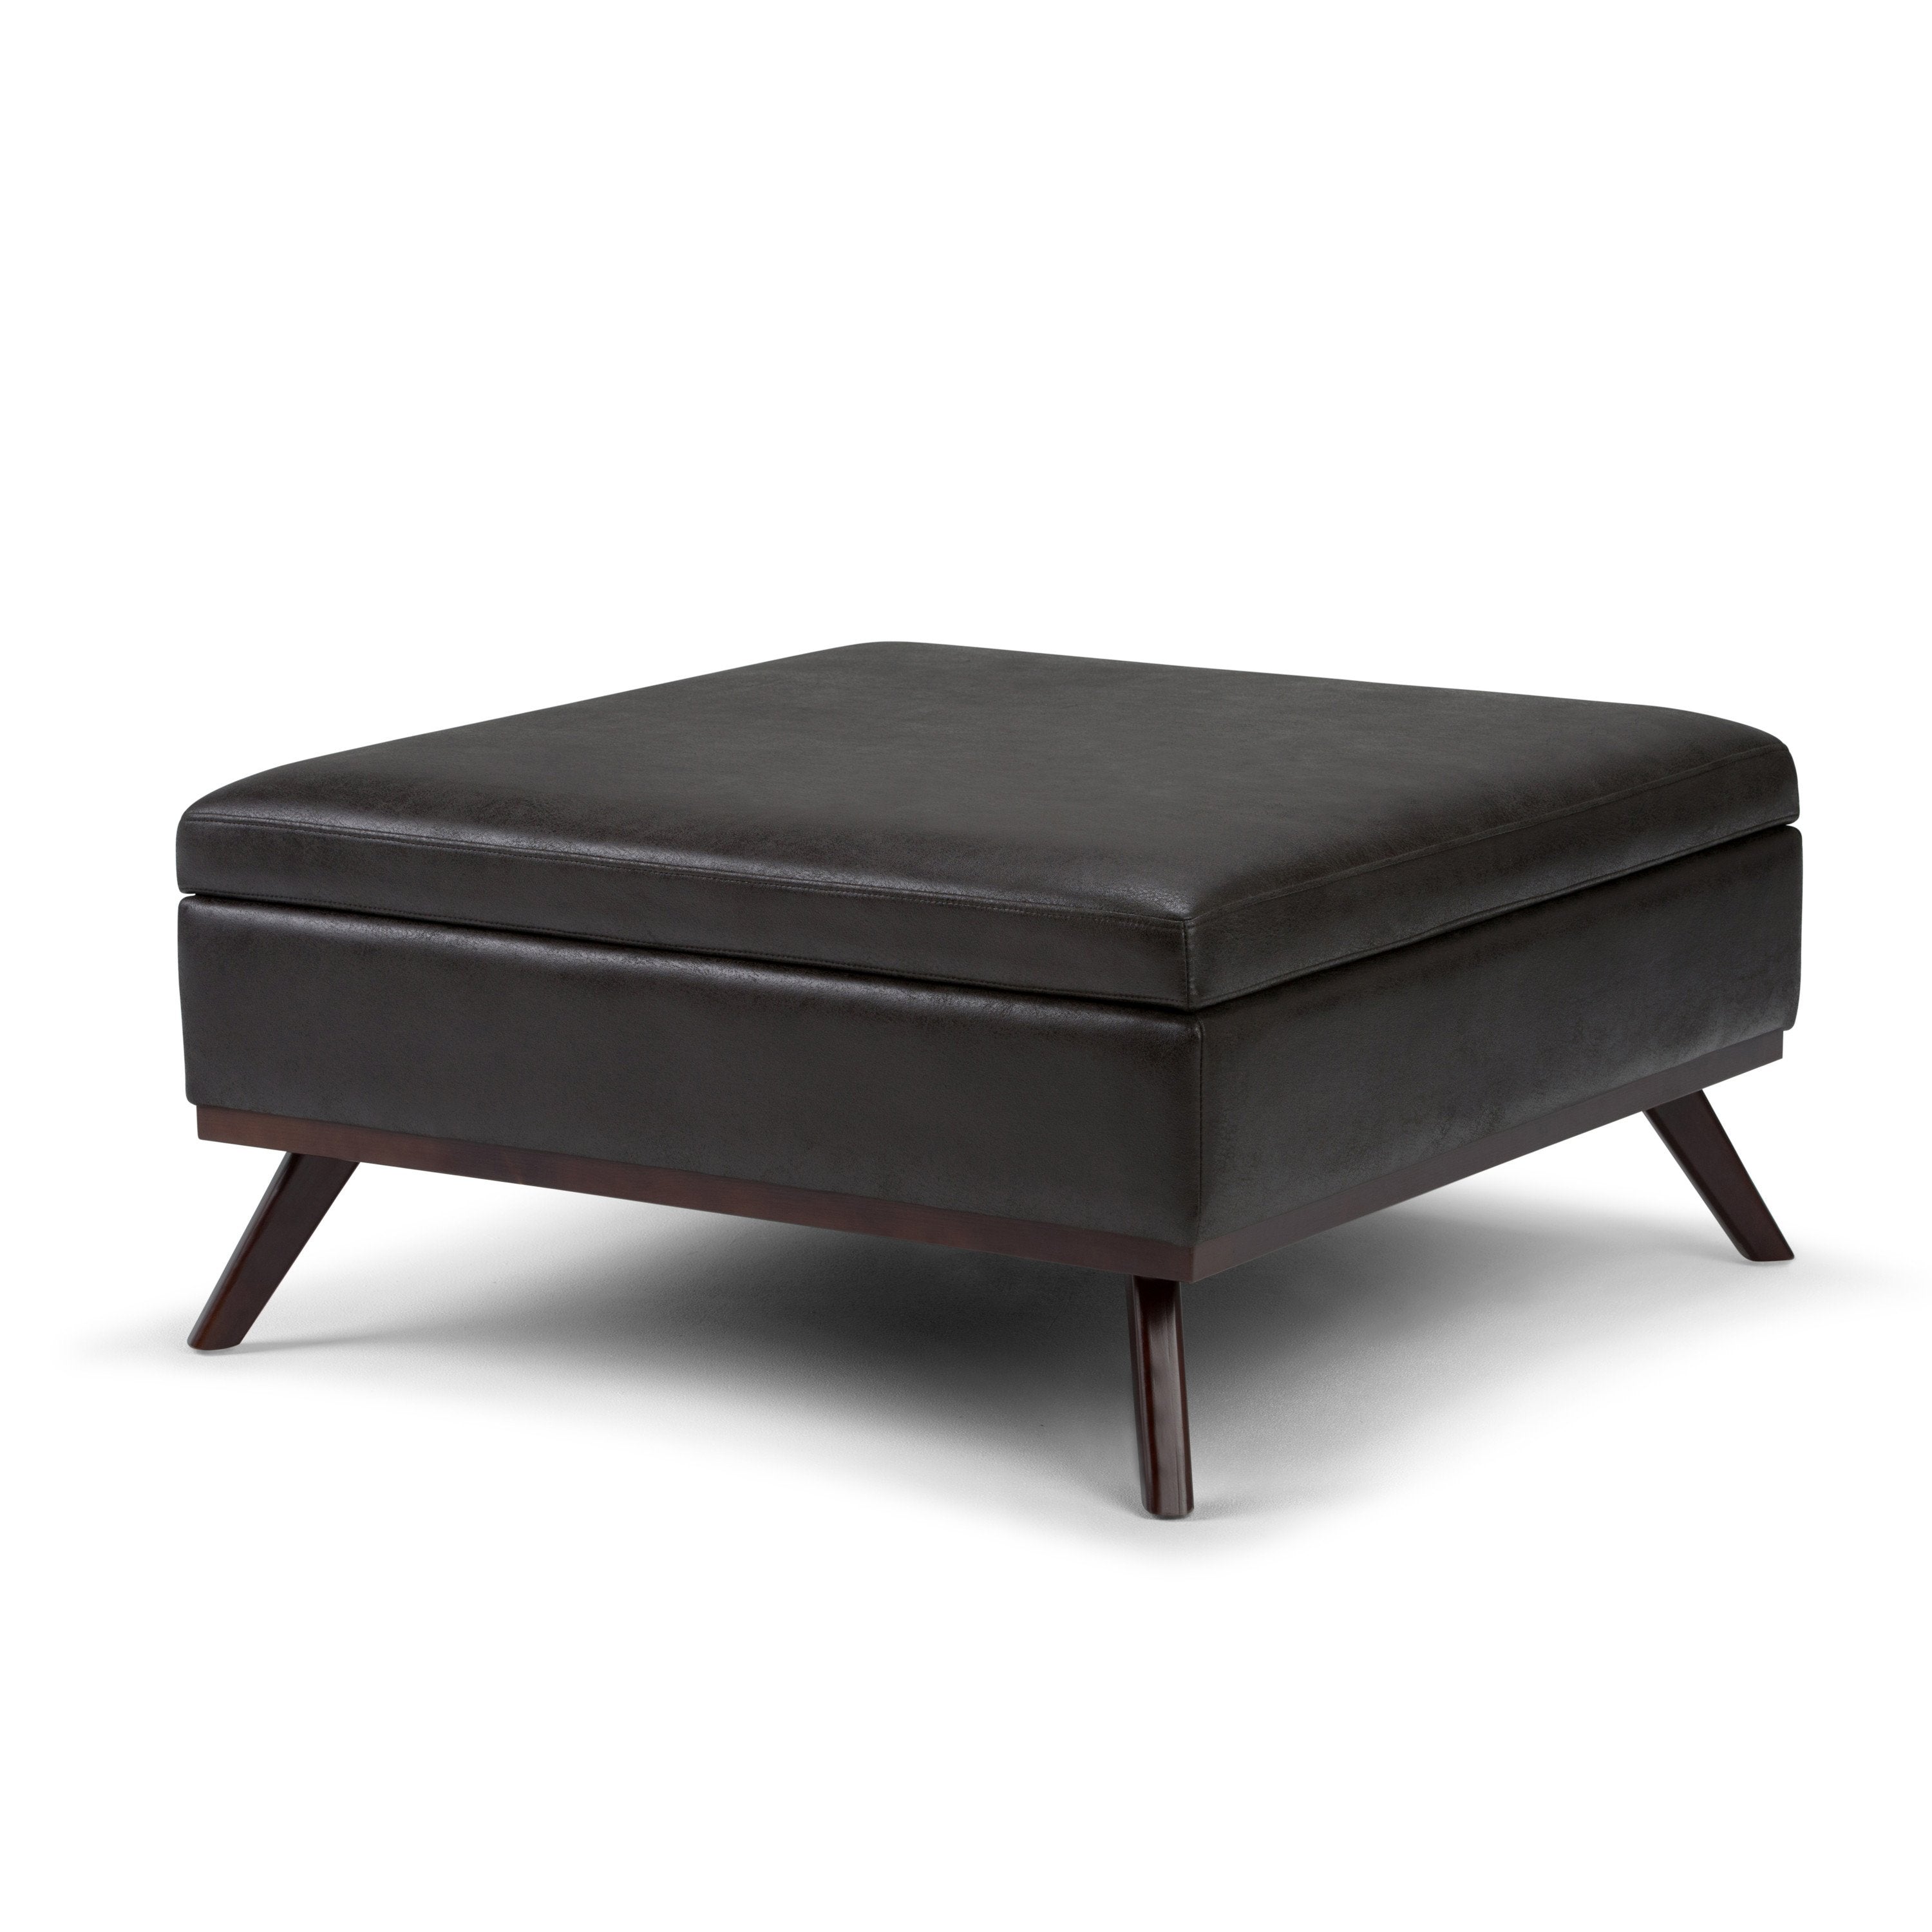 Distressed Black Distressed Vegan Leather | Owen Coffee Table Ottoman with Storage